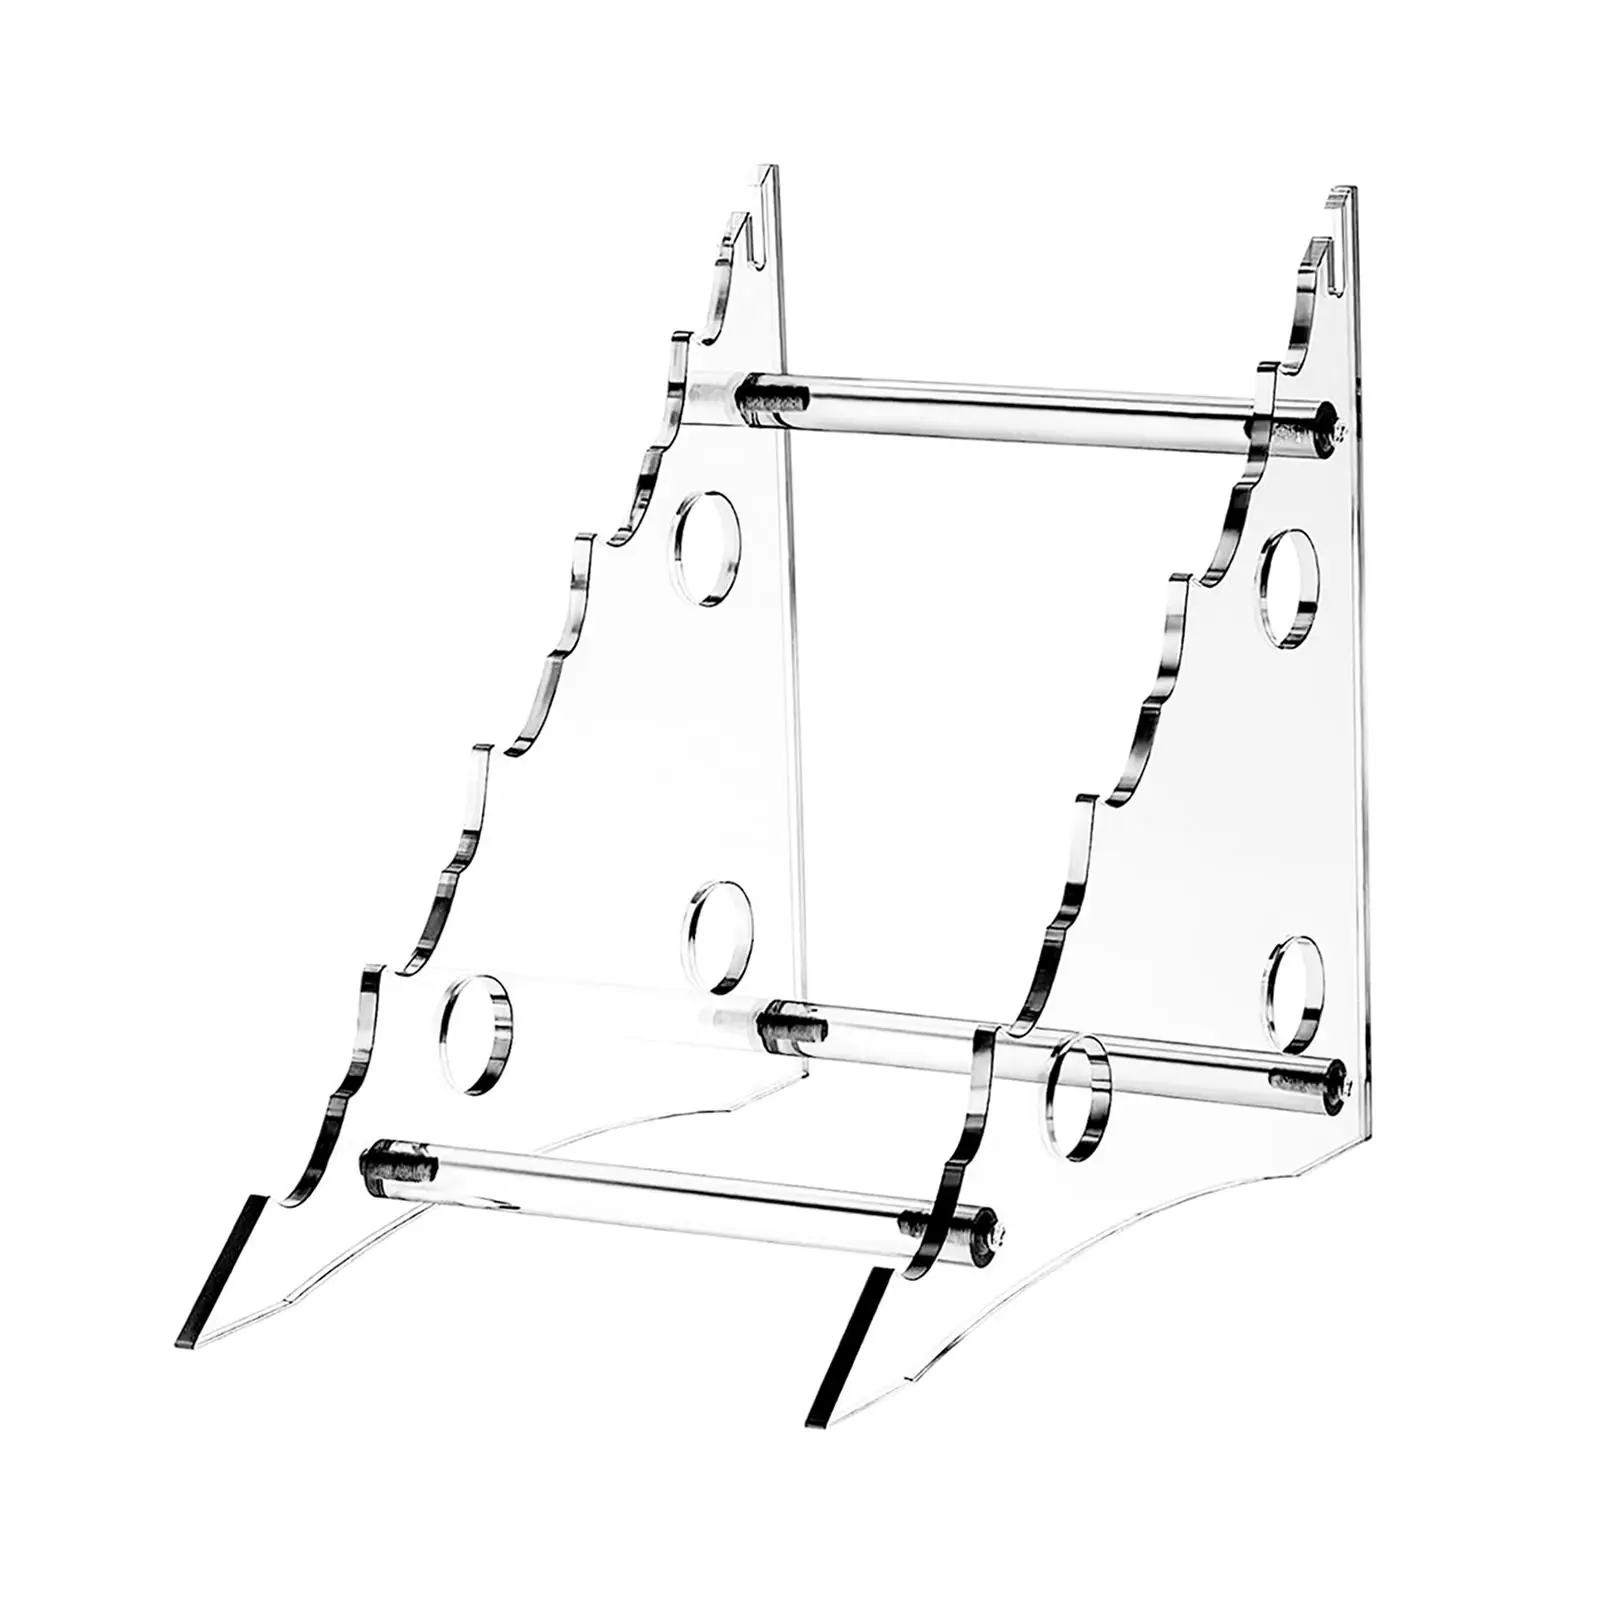 4 Tiers Acrylic Display Stand Bracket Easel Stands Display Holder for Decor